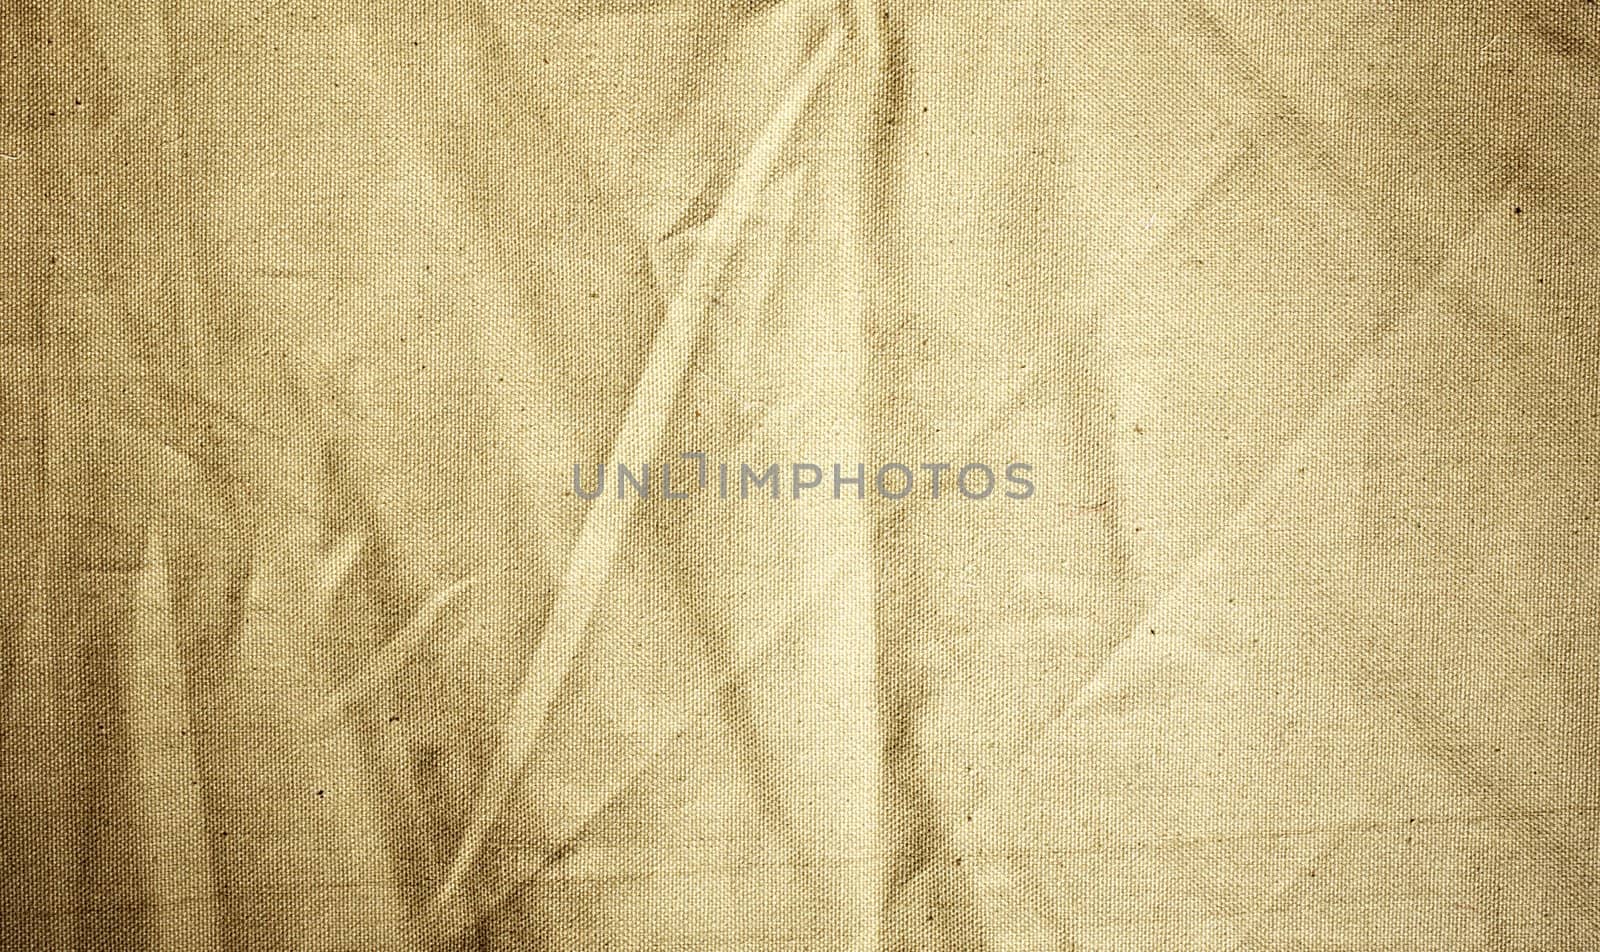 Background of crumpled dense fabric colored in beige tones